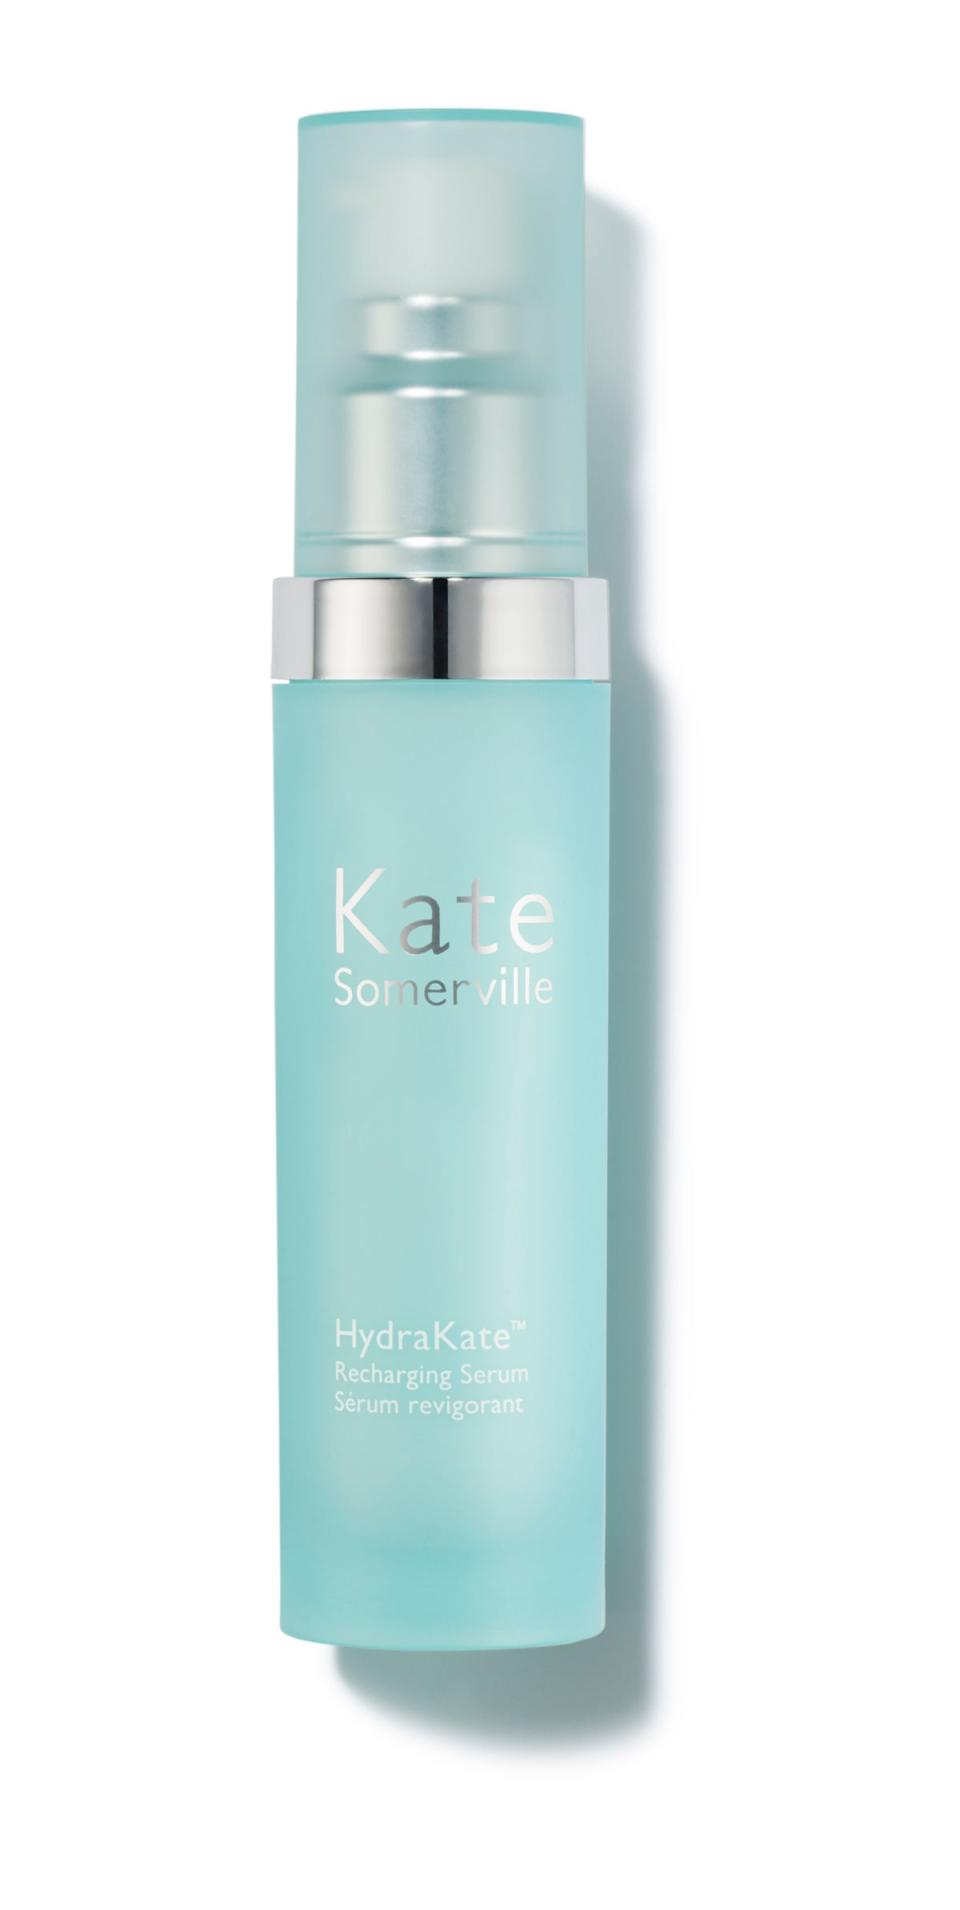 ‘Aquaport’ technology  with glycerin,  glyceryl glucoside and  betaine to balance.  £53 (katesomer ville.co.uk) (Kate Somerville HydraKate Recharging Serum)